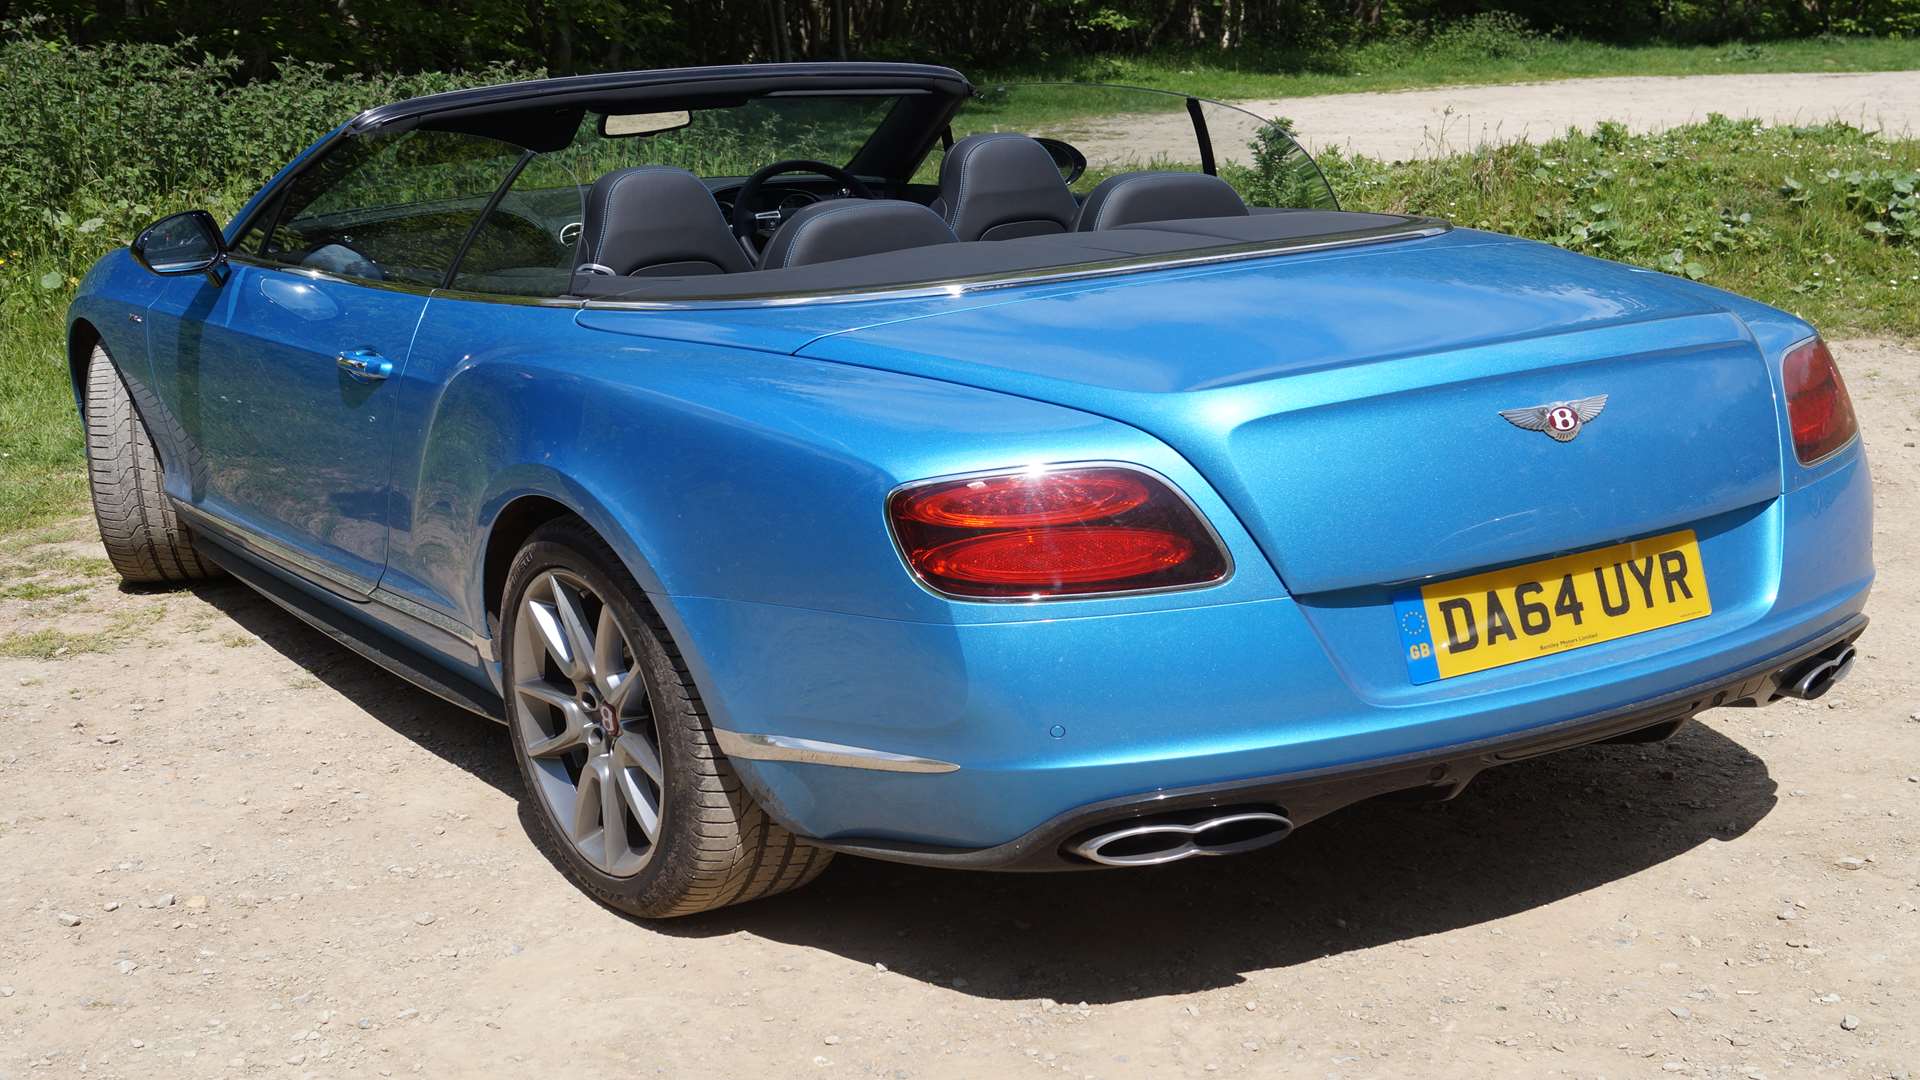 The GT Continental is a real head-turner, particularly in Kingfisher blue